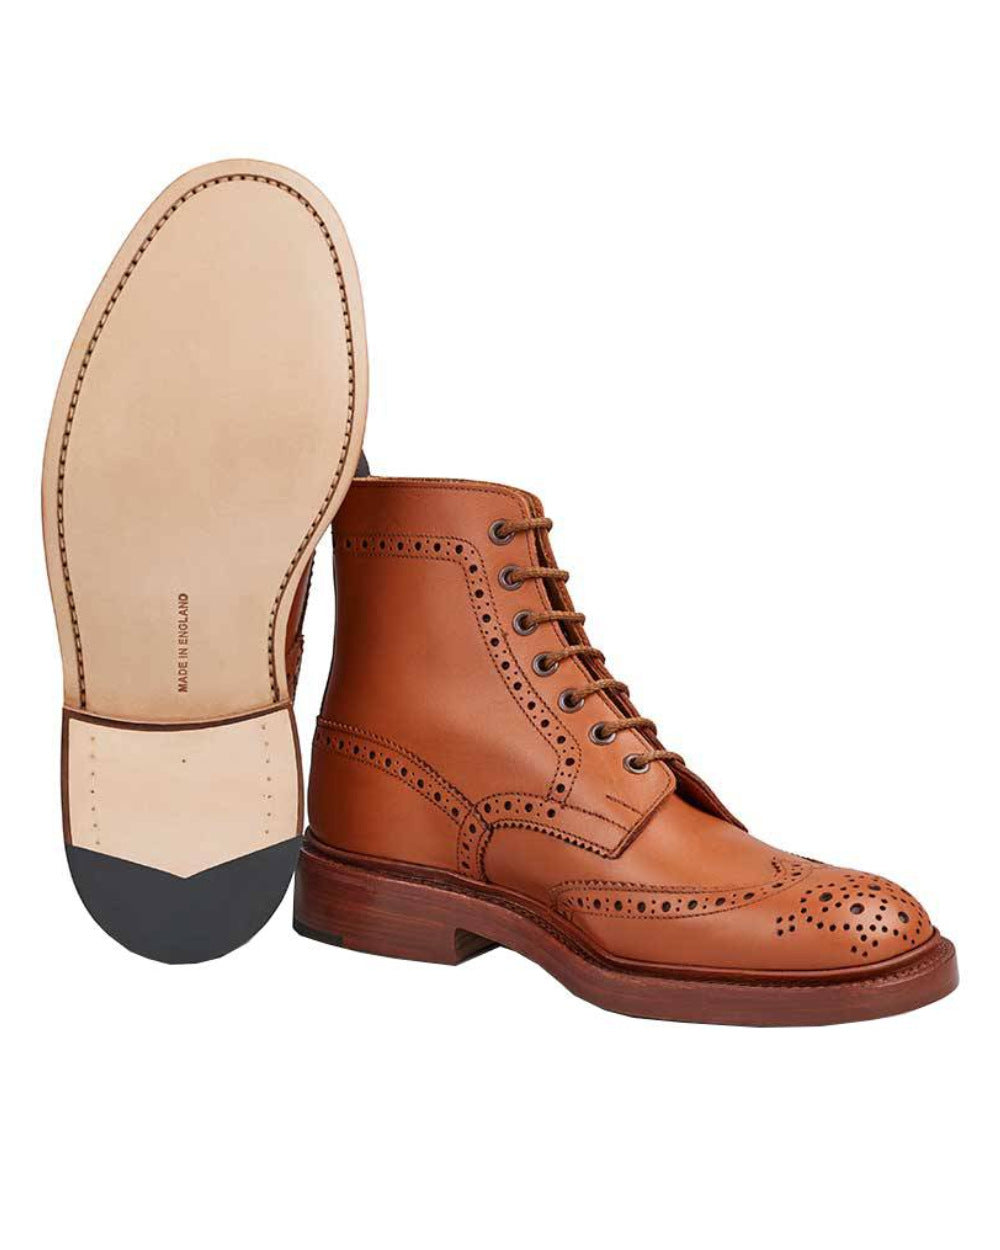 Tan Coloured Trickers Stow Leather Sole Country Boot On A White Background 